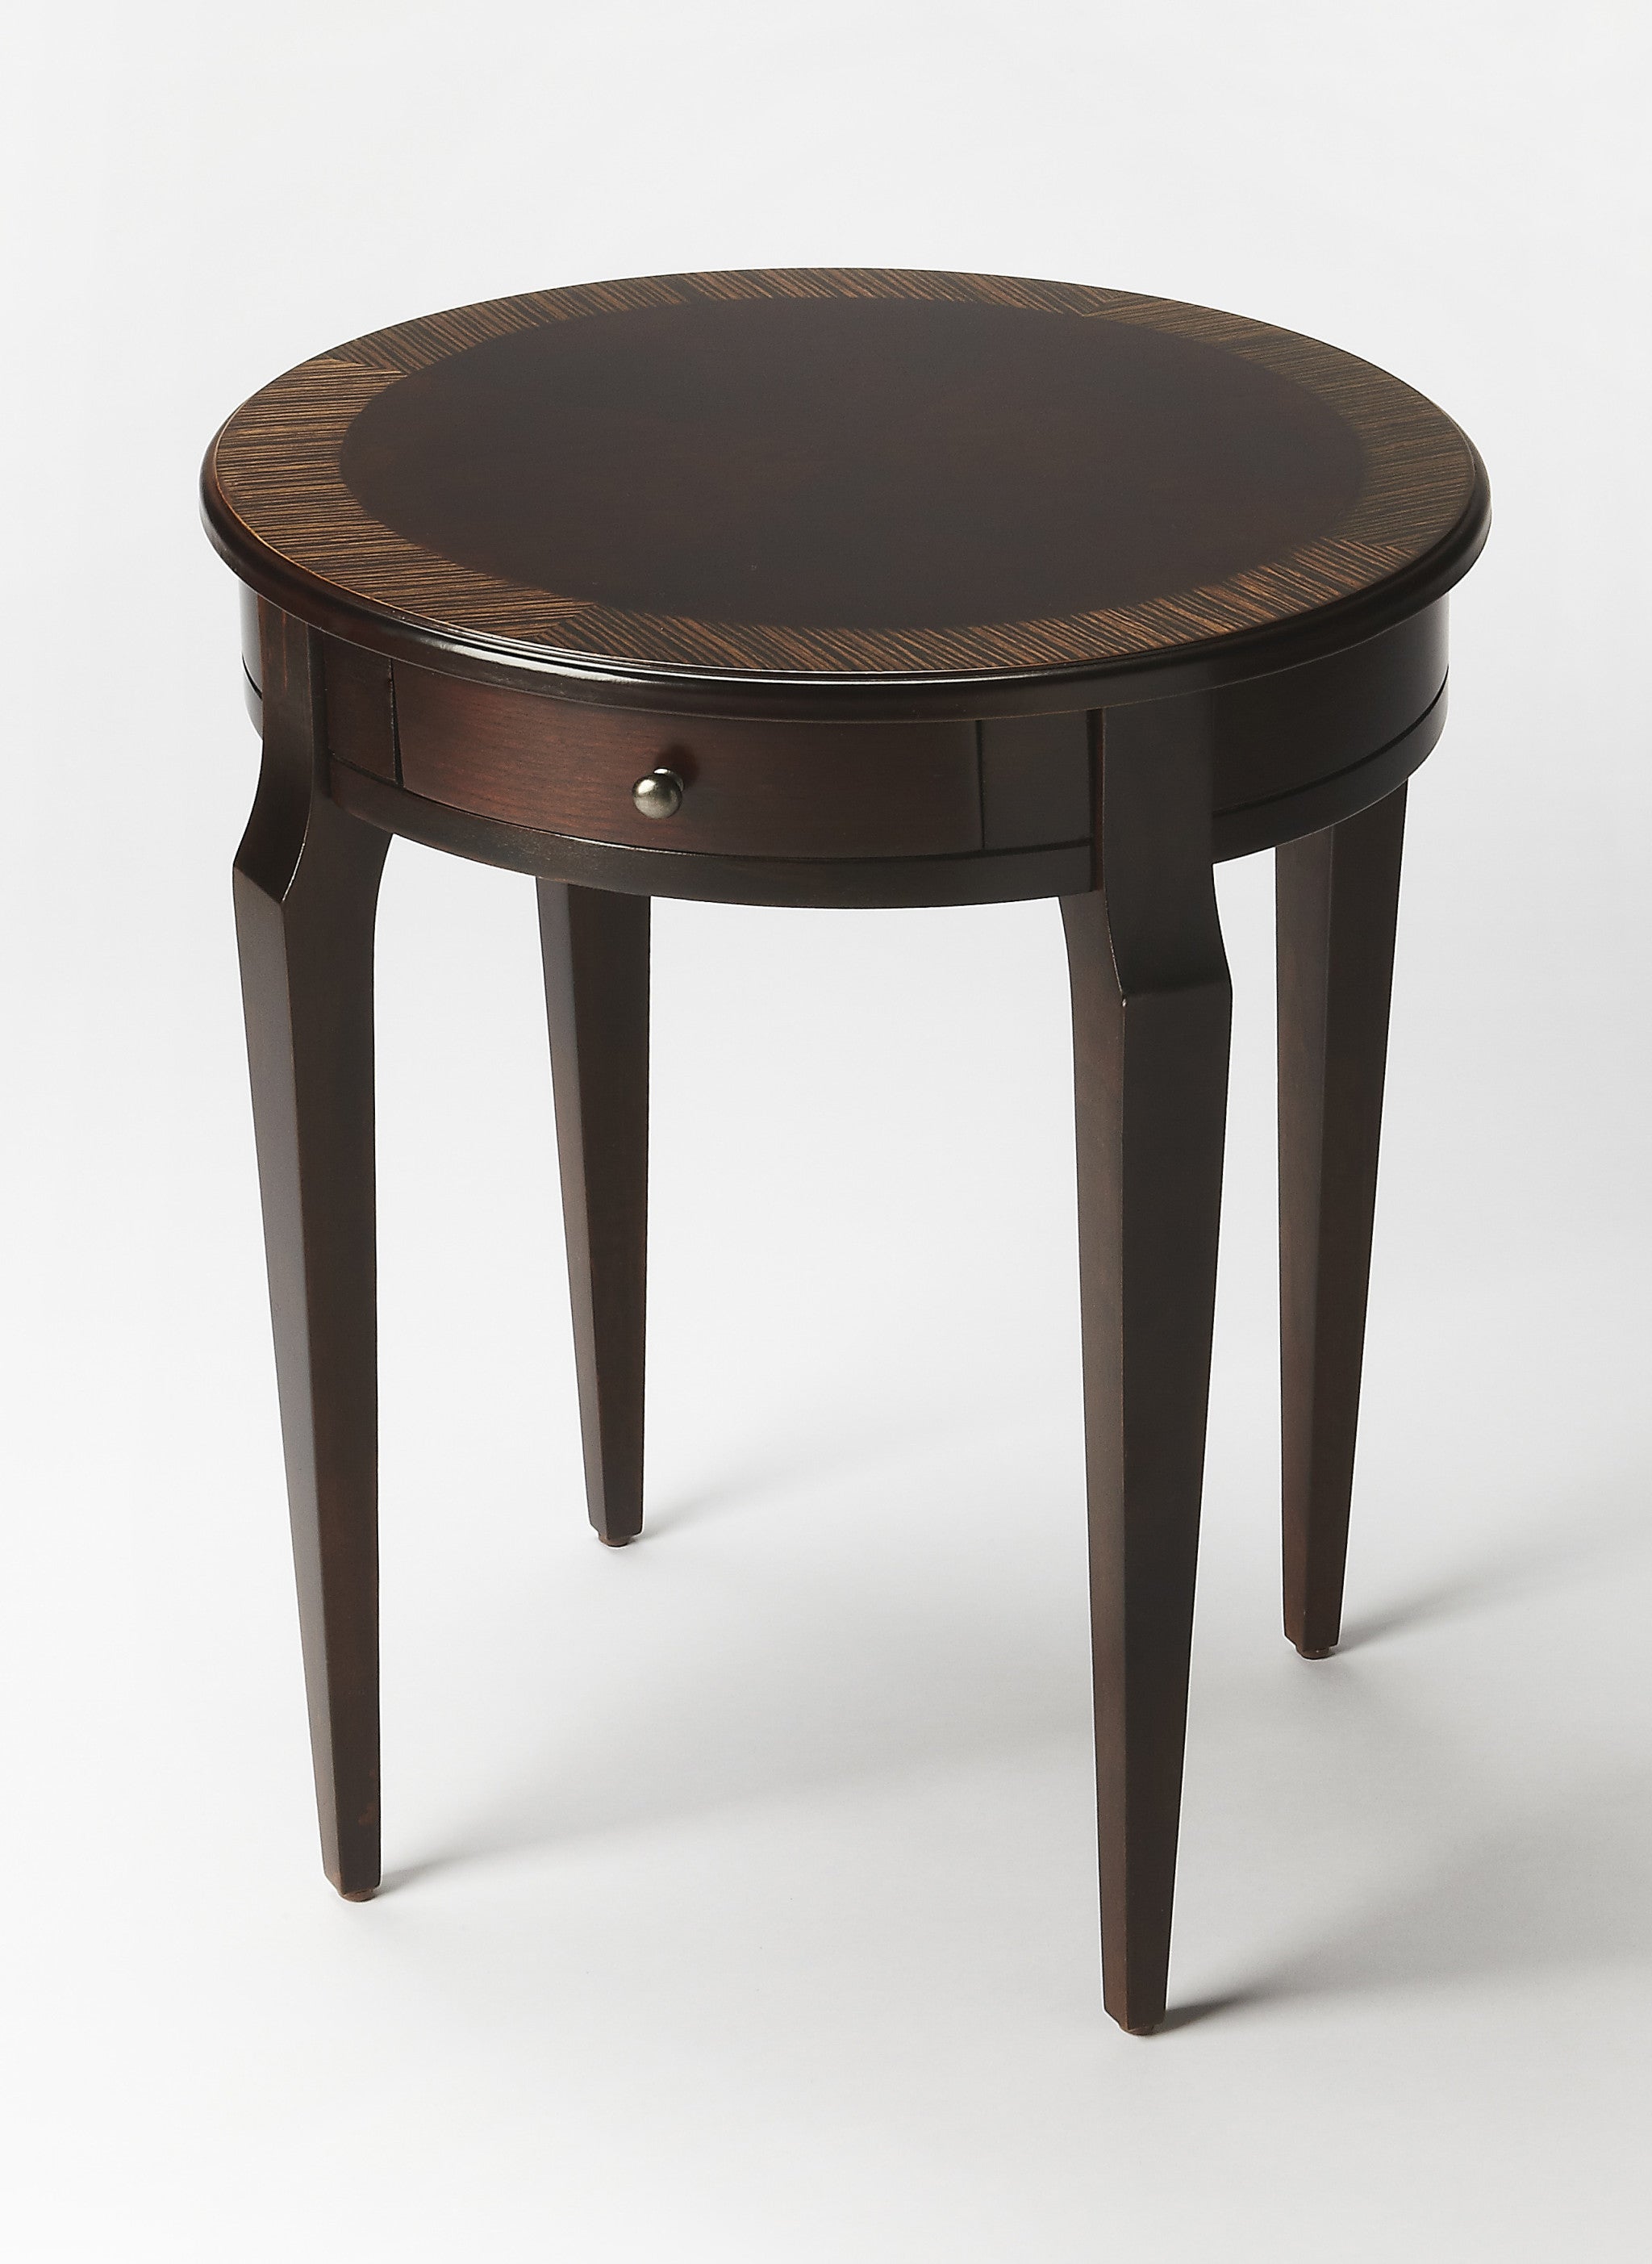 24" Dark Brown And Cherry Nouveau Manufactured Wood Round End Table With Drawer